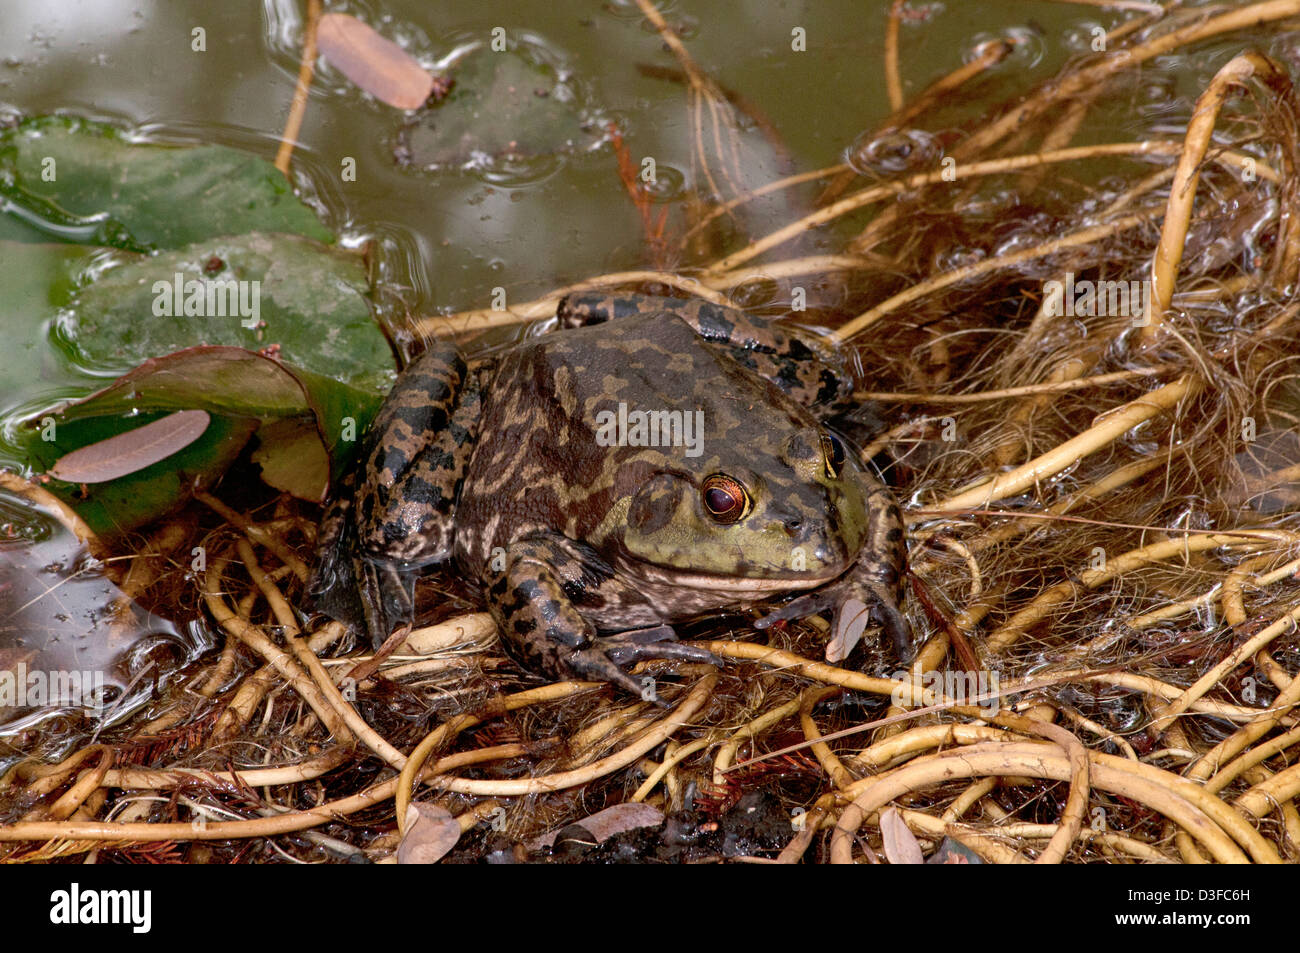 Invasive frog species photographed in a park in Riverside, California Stock Photo